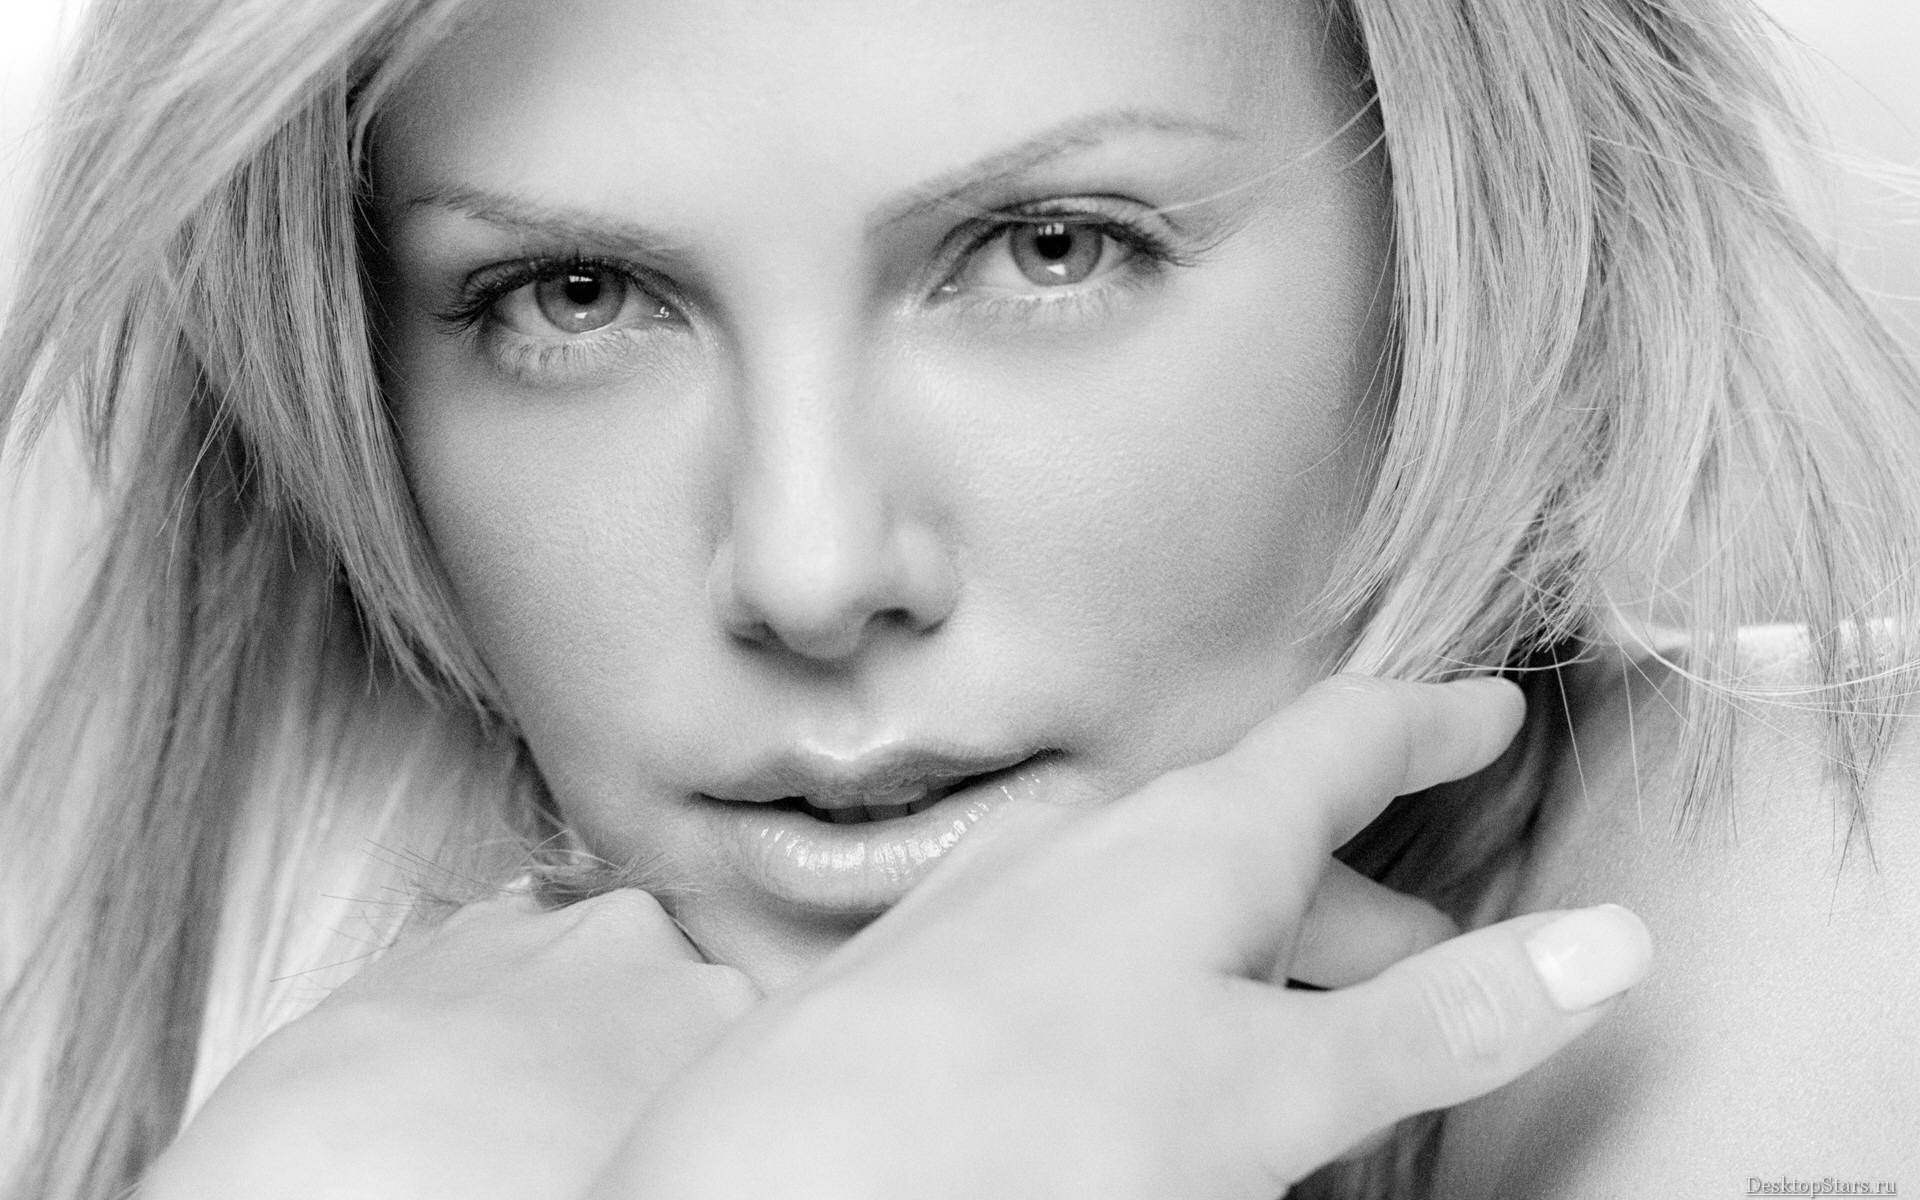 blondes, Women, Actress, Models, Charlize, Theron, Monochrome, Faces Wallpaper